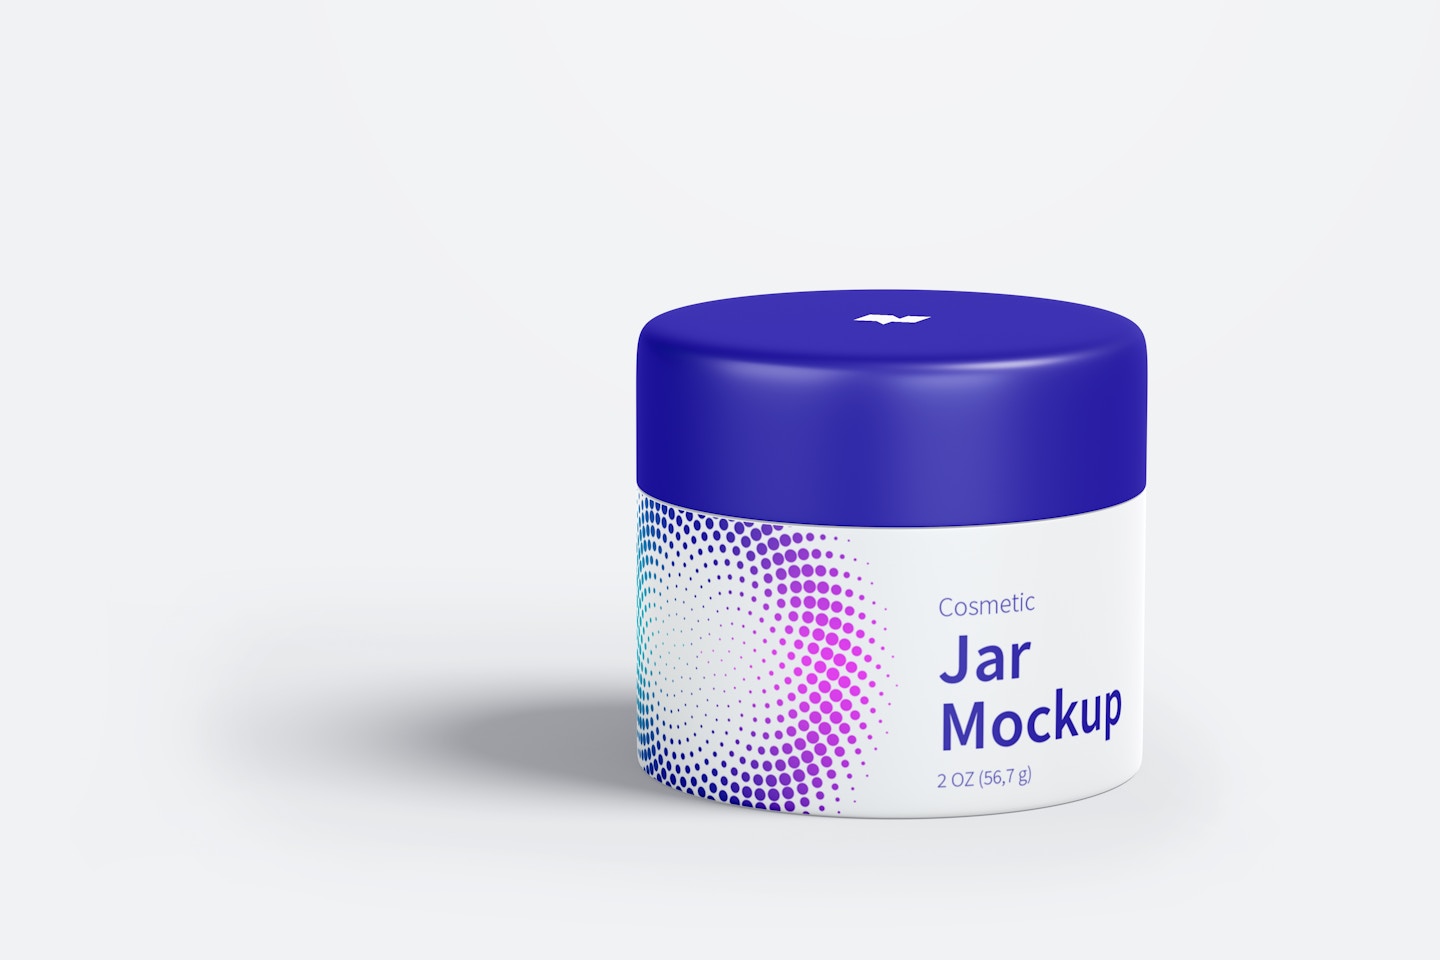 Cosmetic Jar Mockup, Front View 02